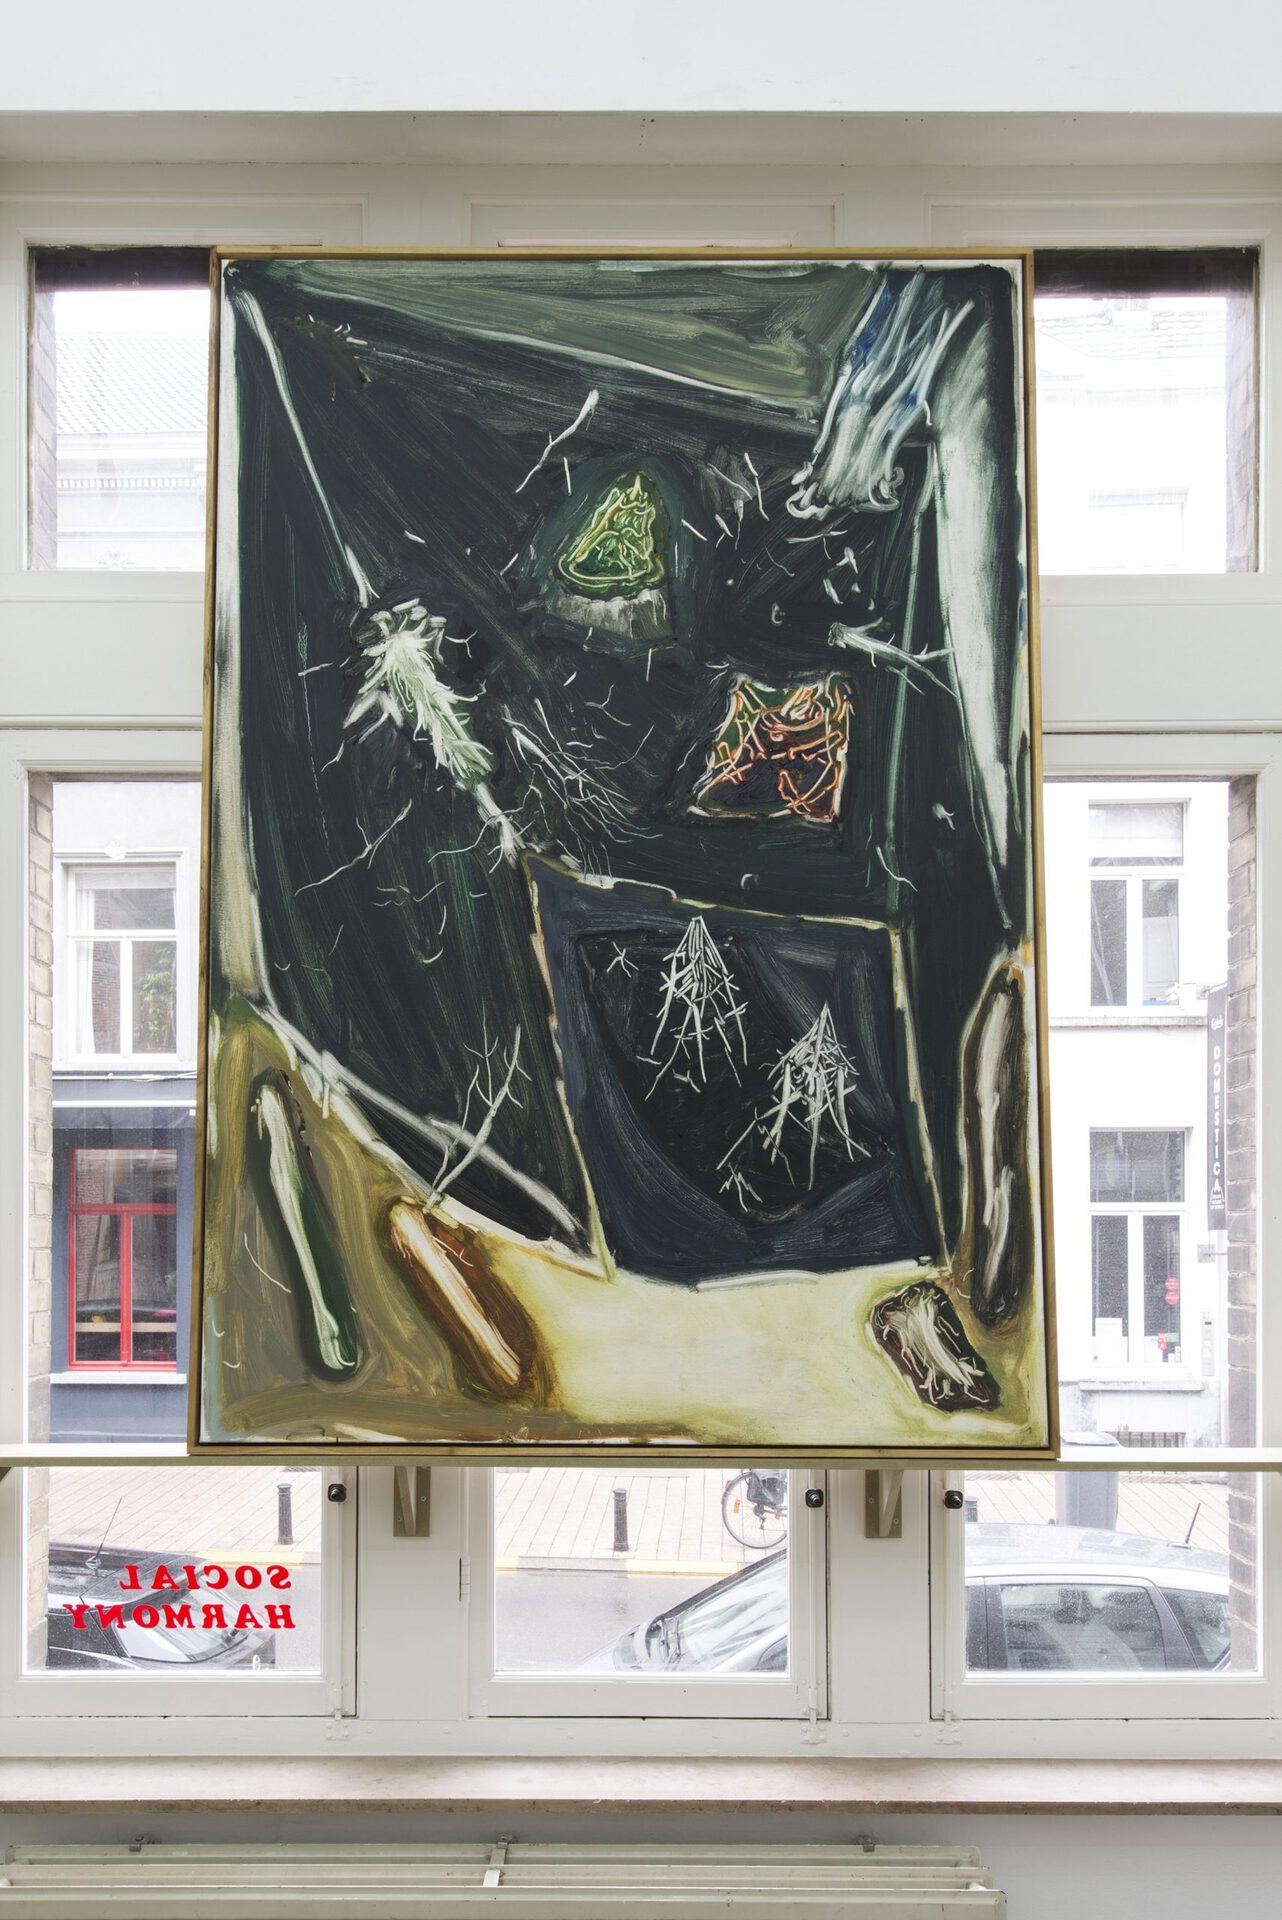 Jonas Dehnen, ’Many island picture making’, oil and beeswax on canvas, black locust artist’s frame, 130 x 190 cm, 2020